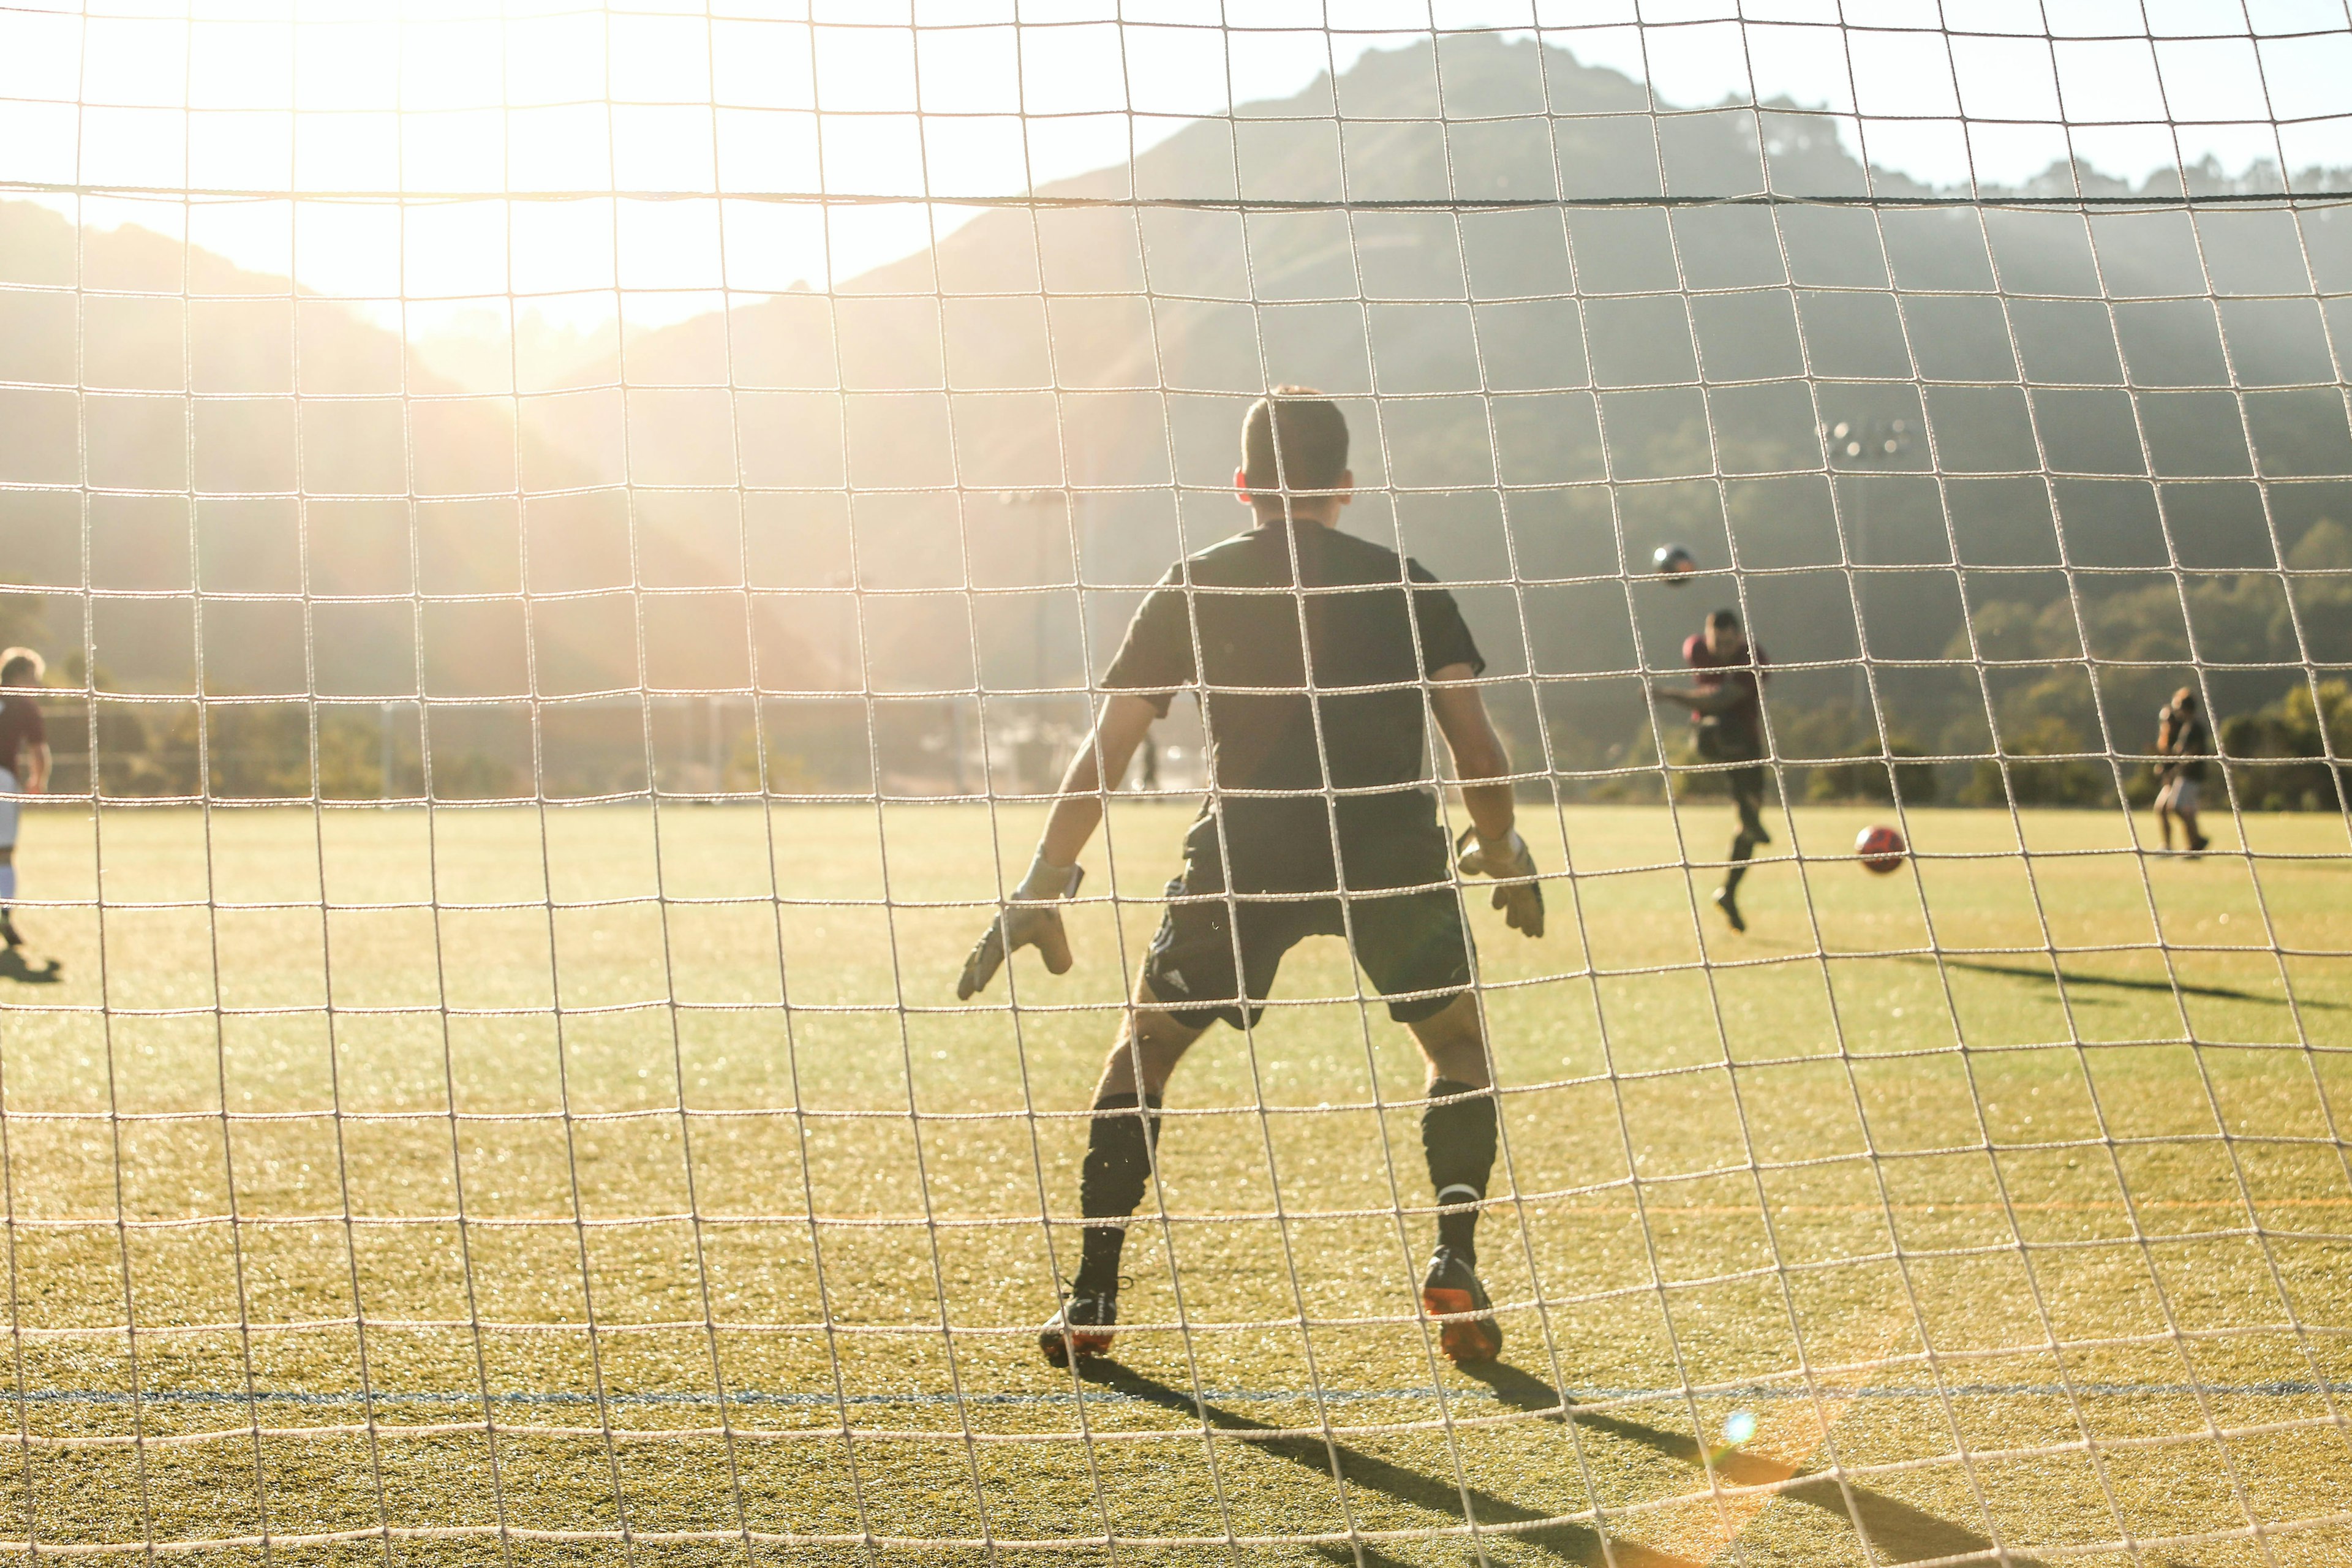 picture of a soccer goalie from behind the net during the daytime